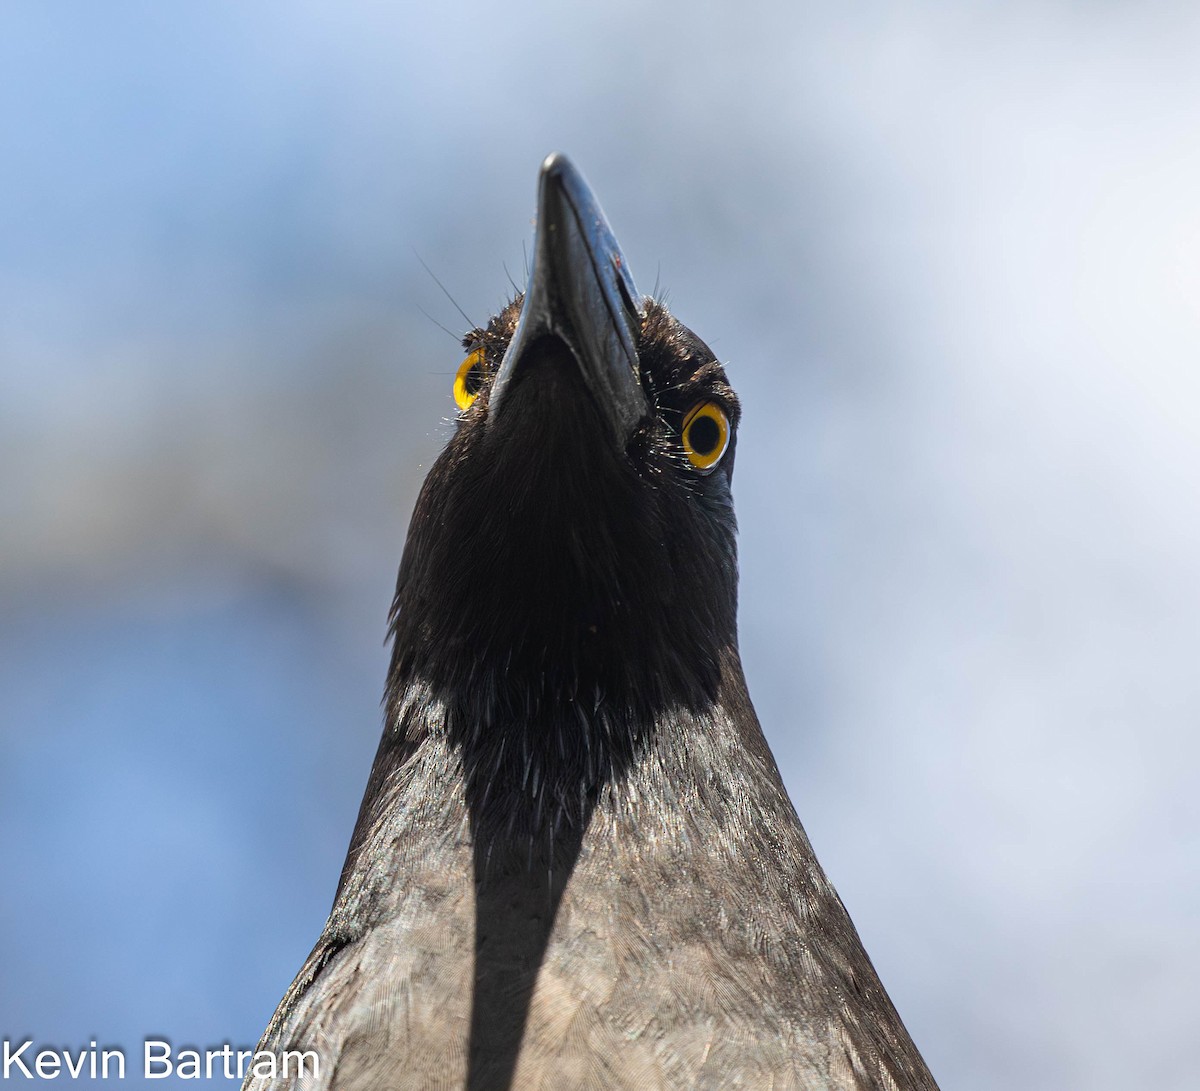 Pied Currawong - Kevin Bartram